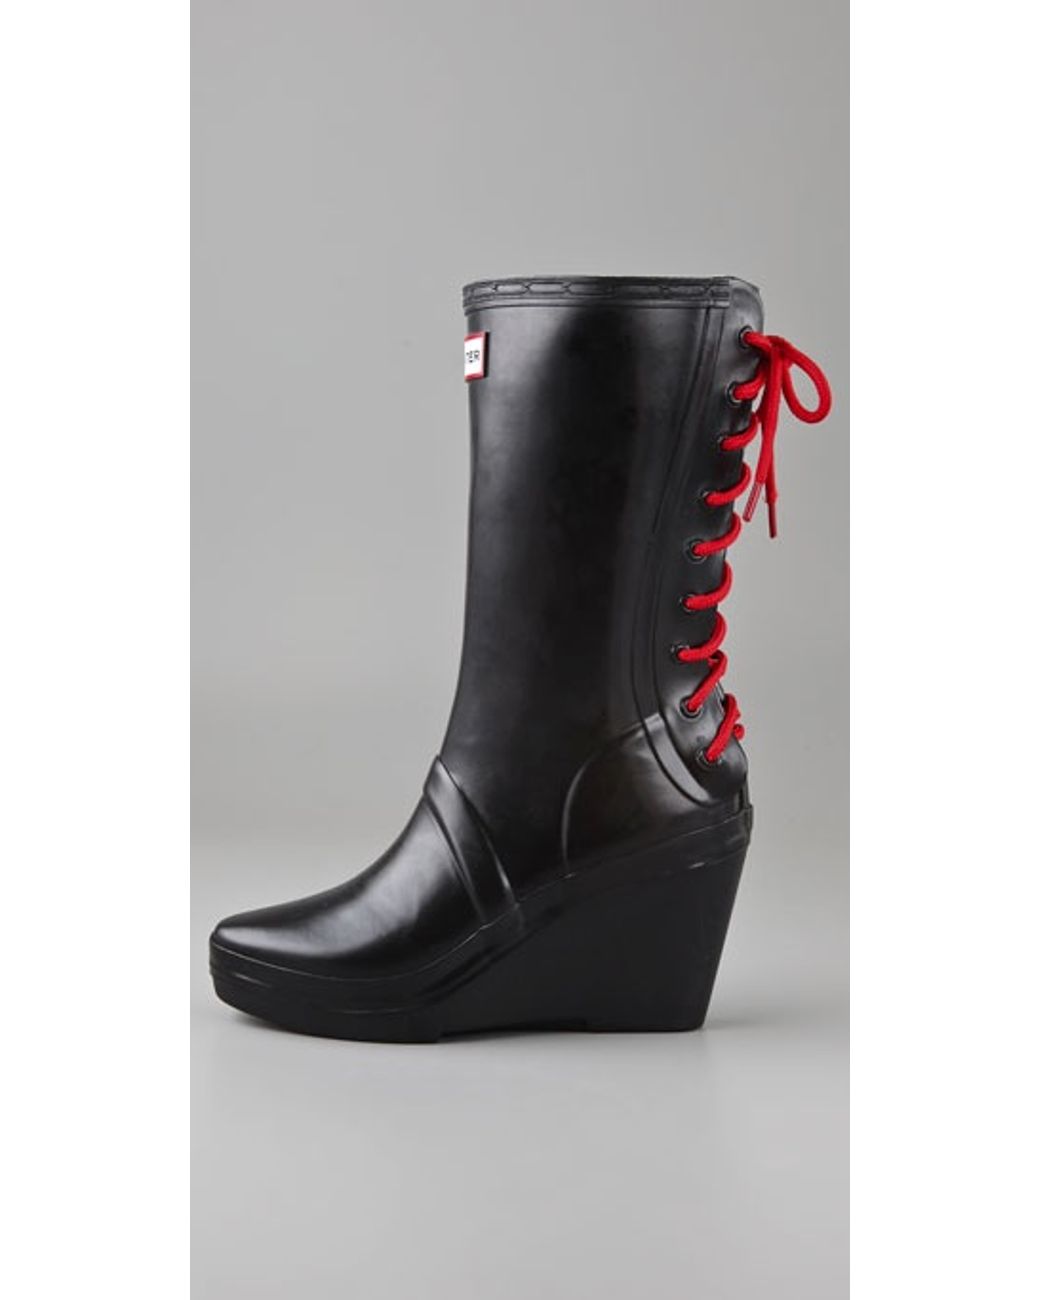 HUNTER Verbier Wedge Boots with Lace Up Detail in Black | Lyst